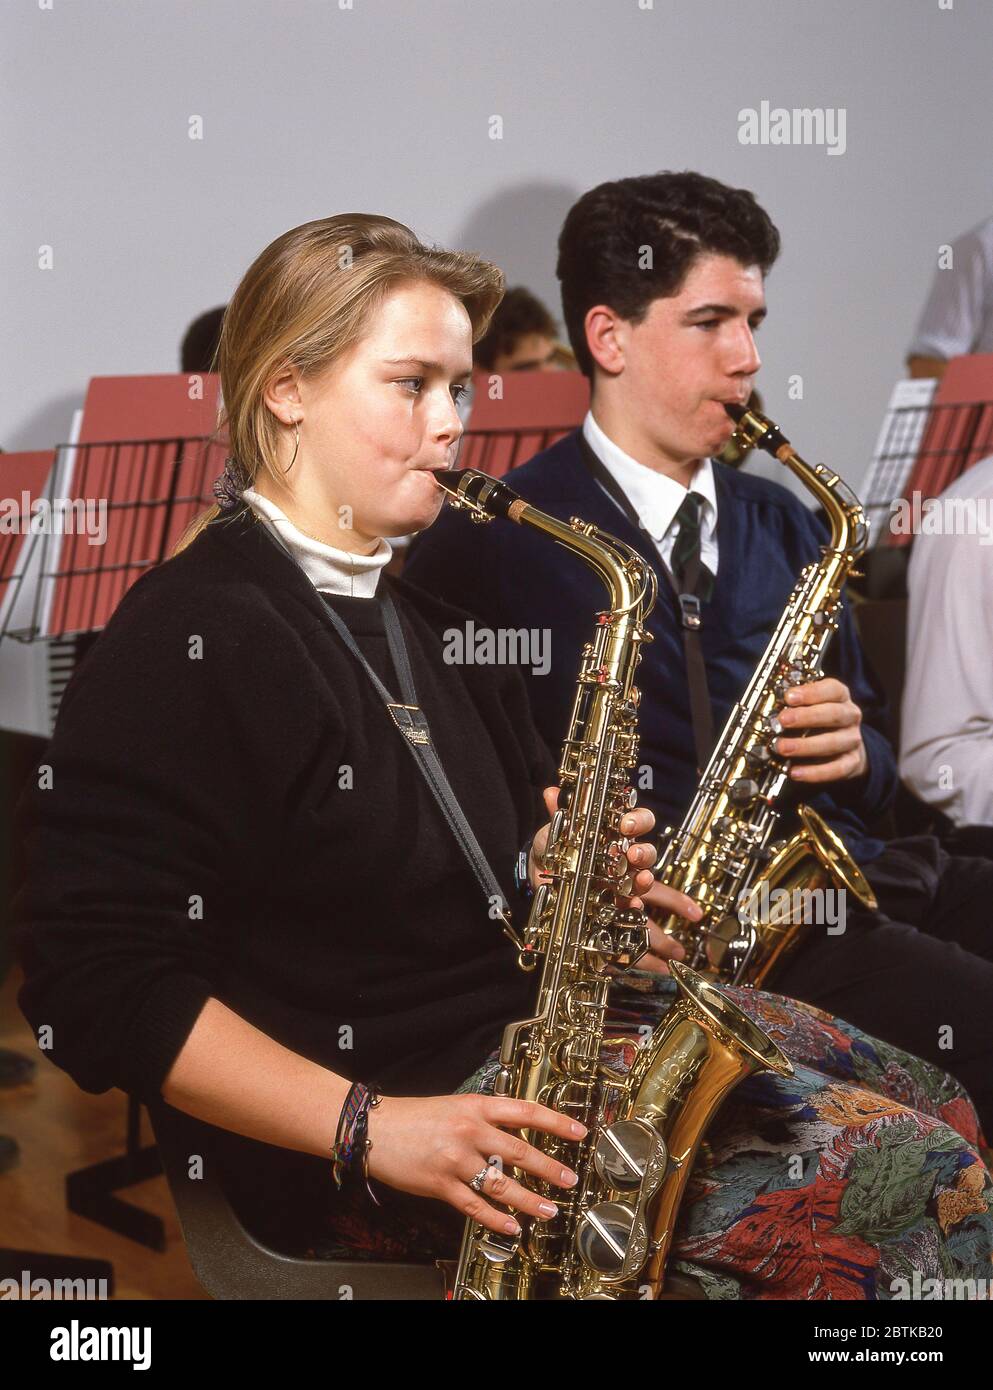 Couple playing saxophone in school orchestra, Surrey, England, United Kingdom Stock Photo